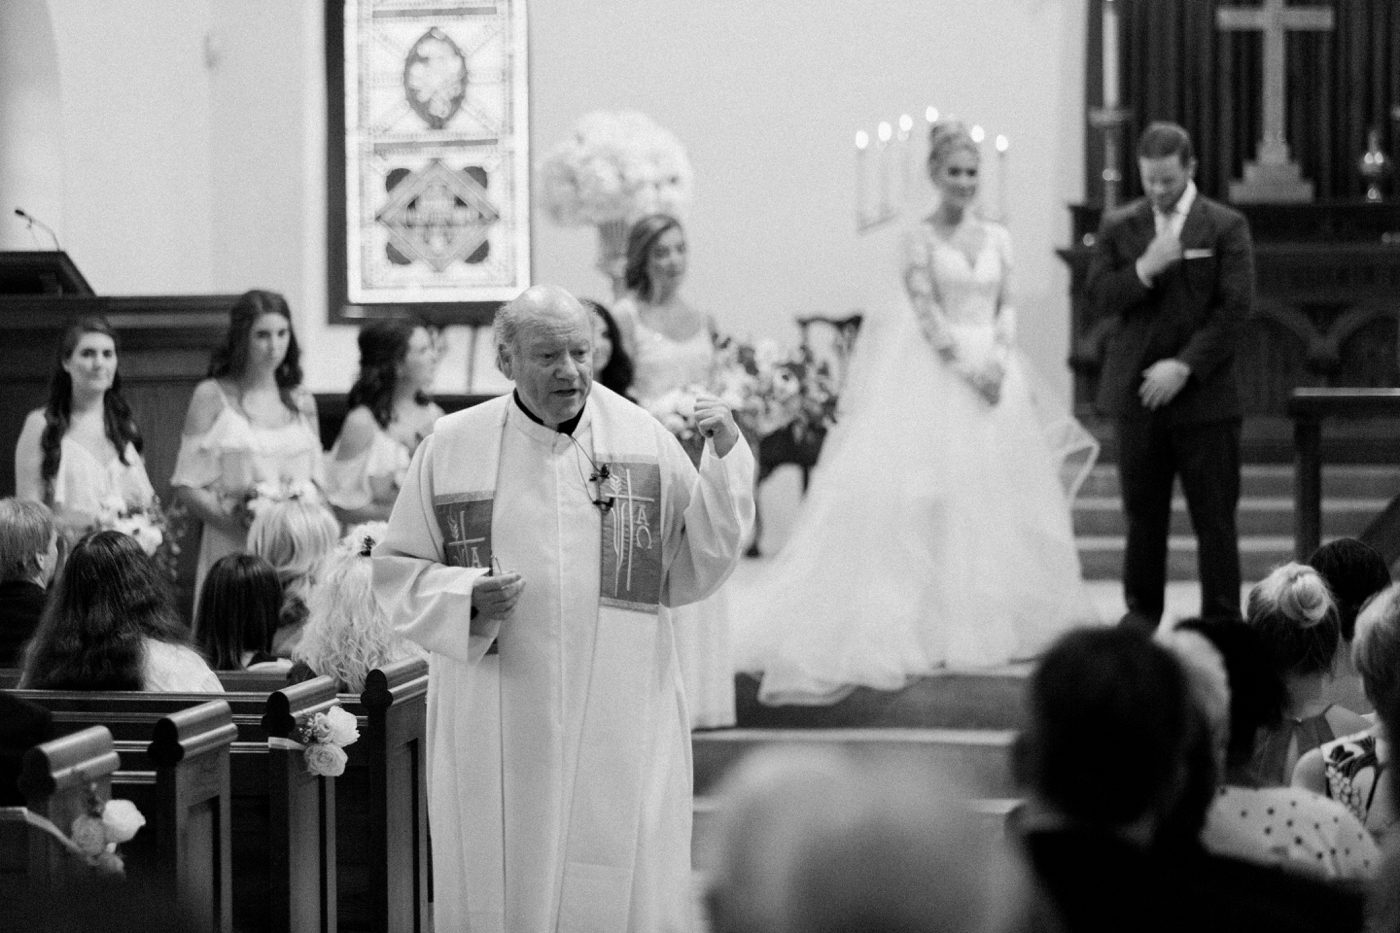 Grooms childhood priest giving a sermon during the wedding ceremony